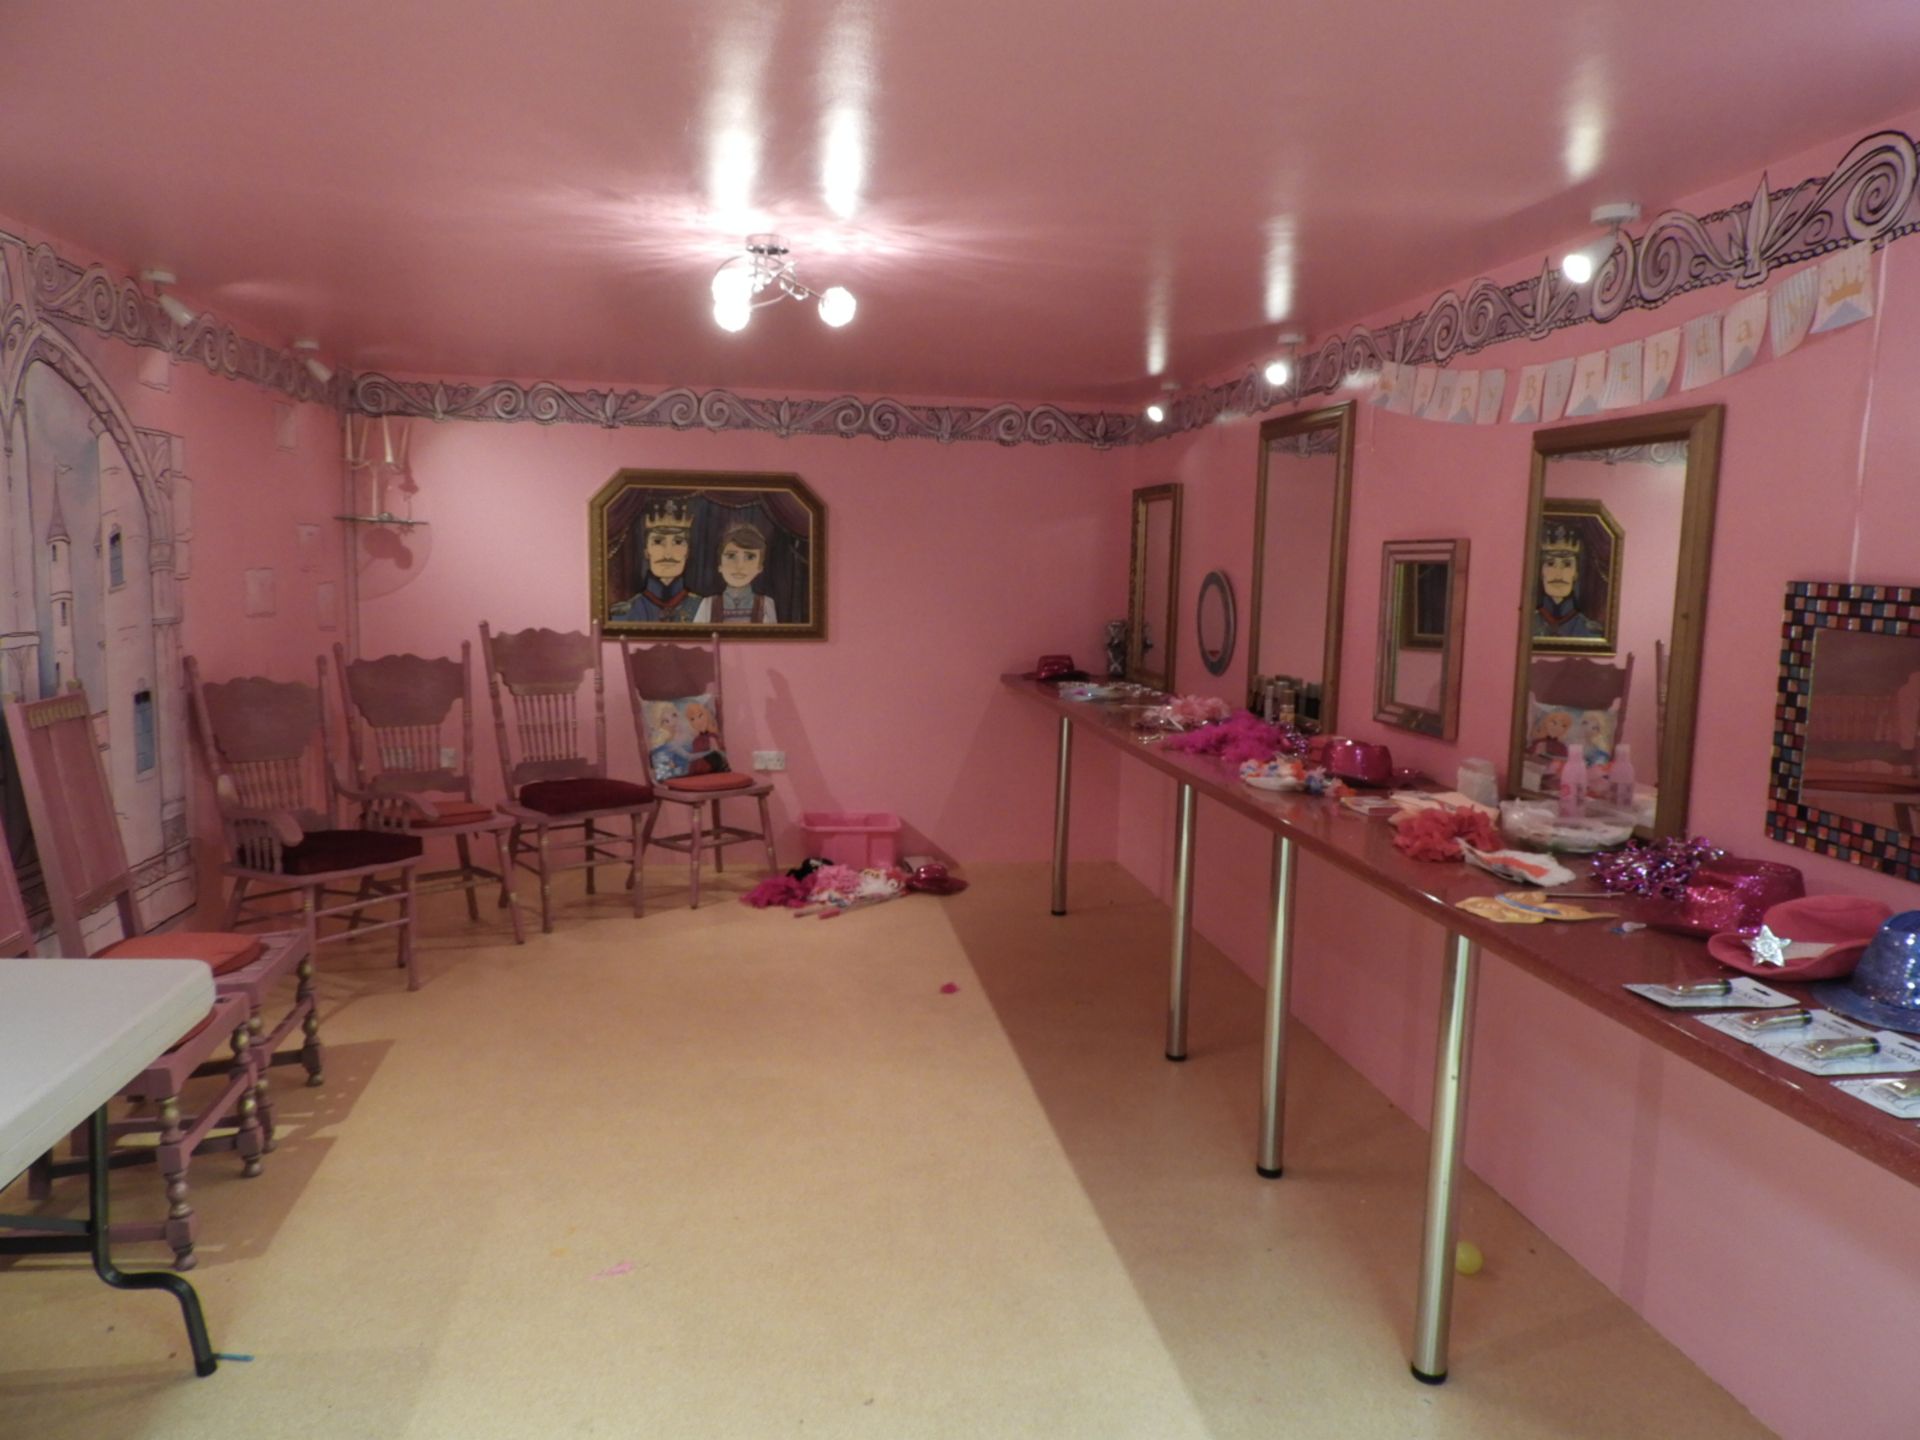 *The Contents of the Princess Party Room